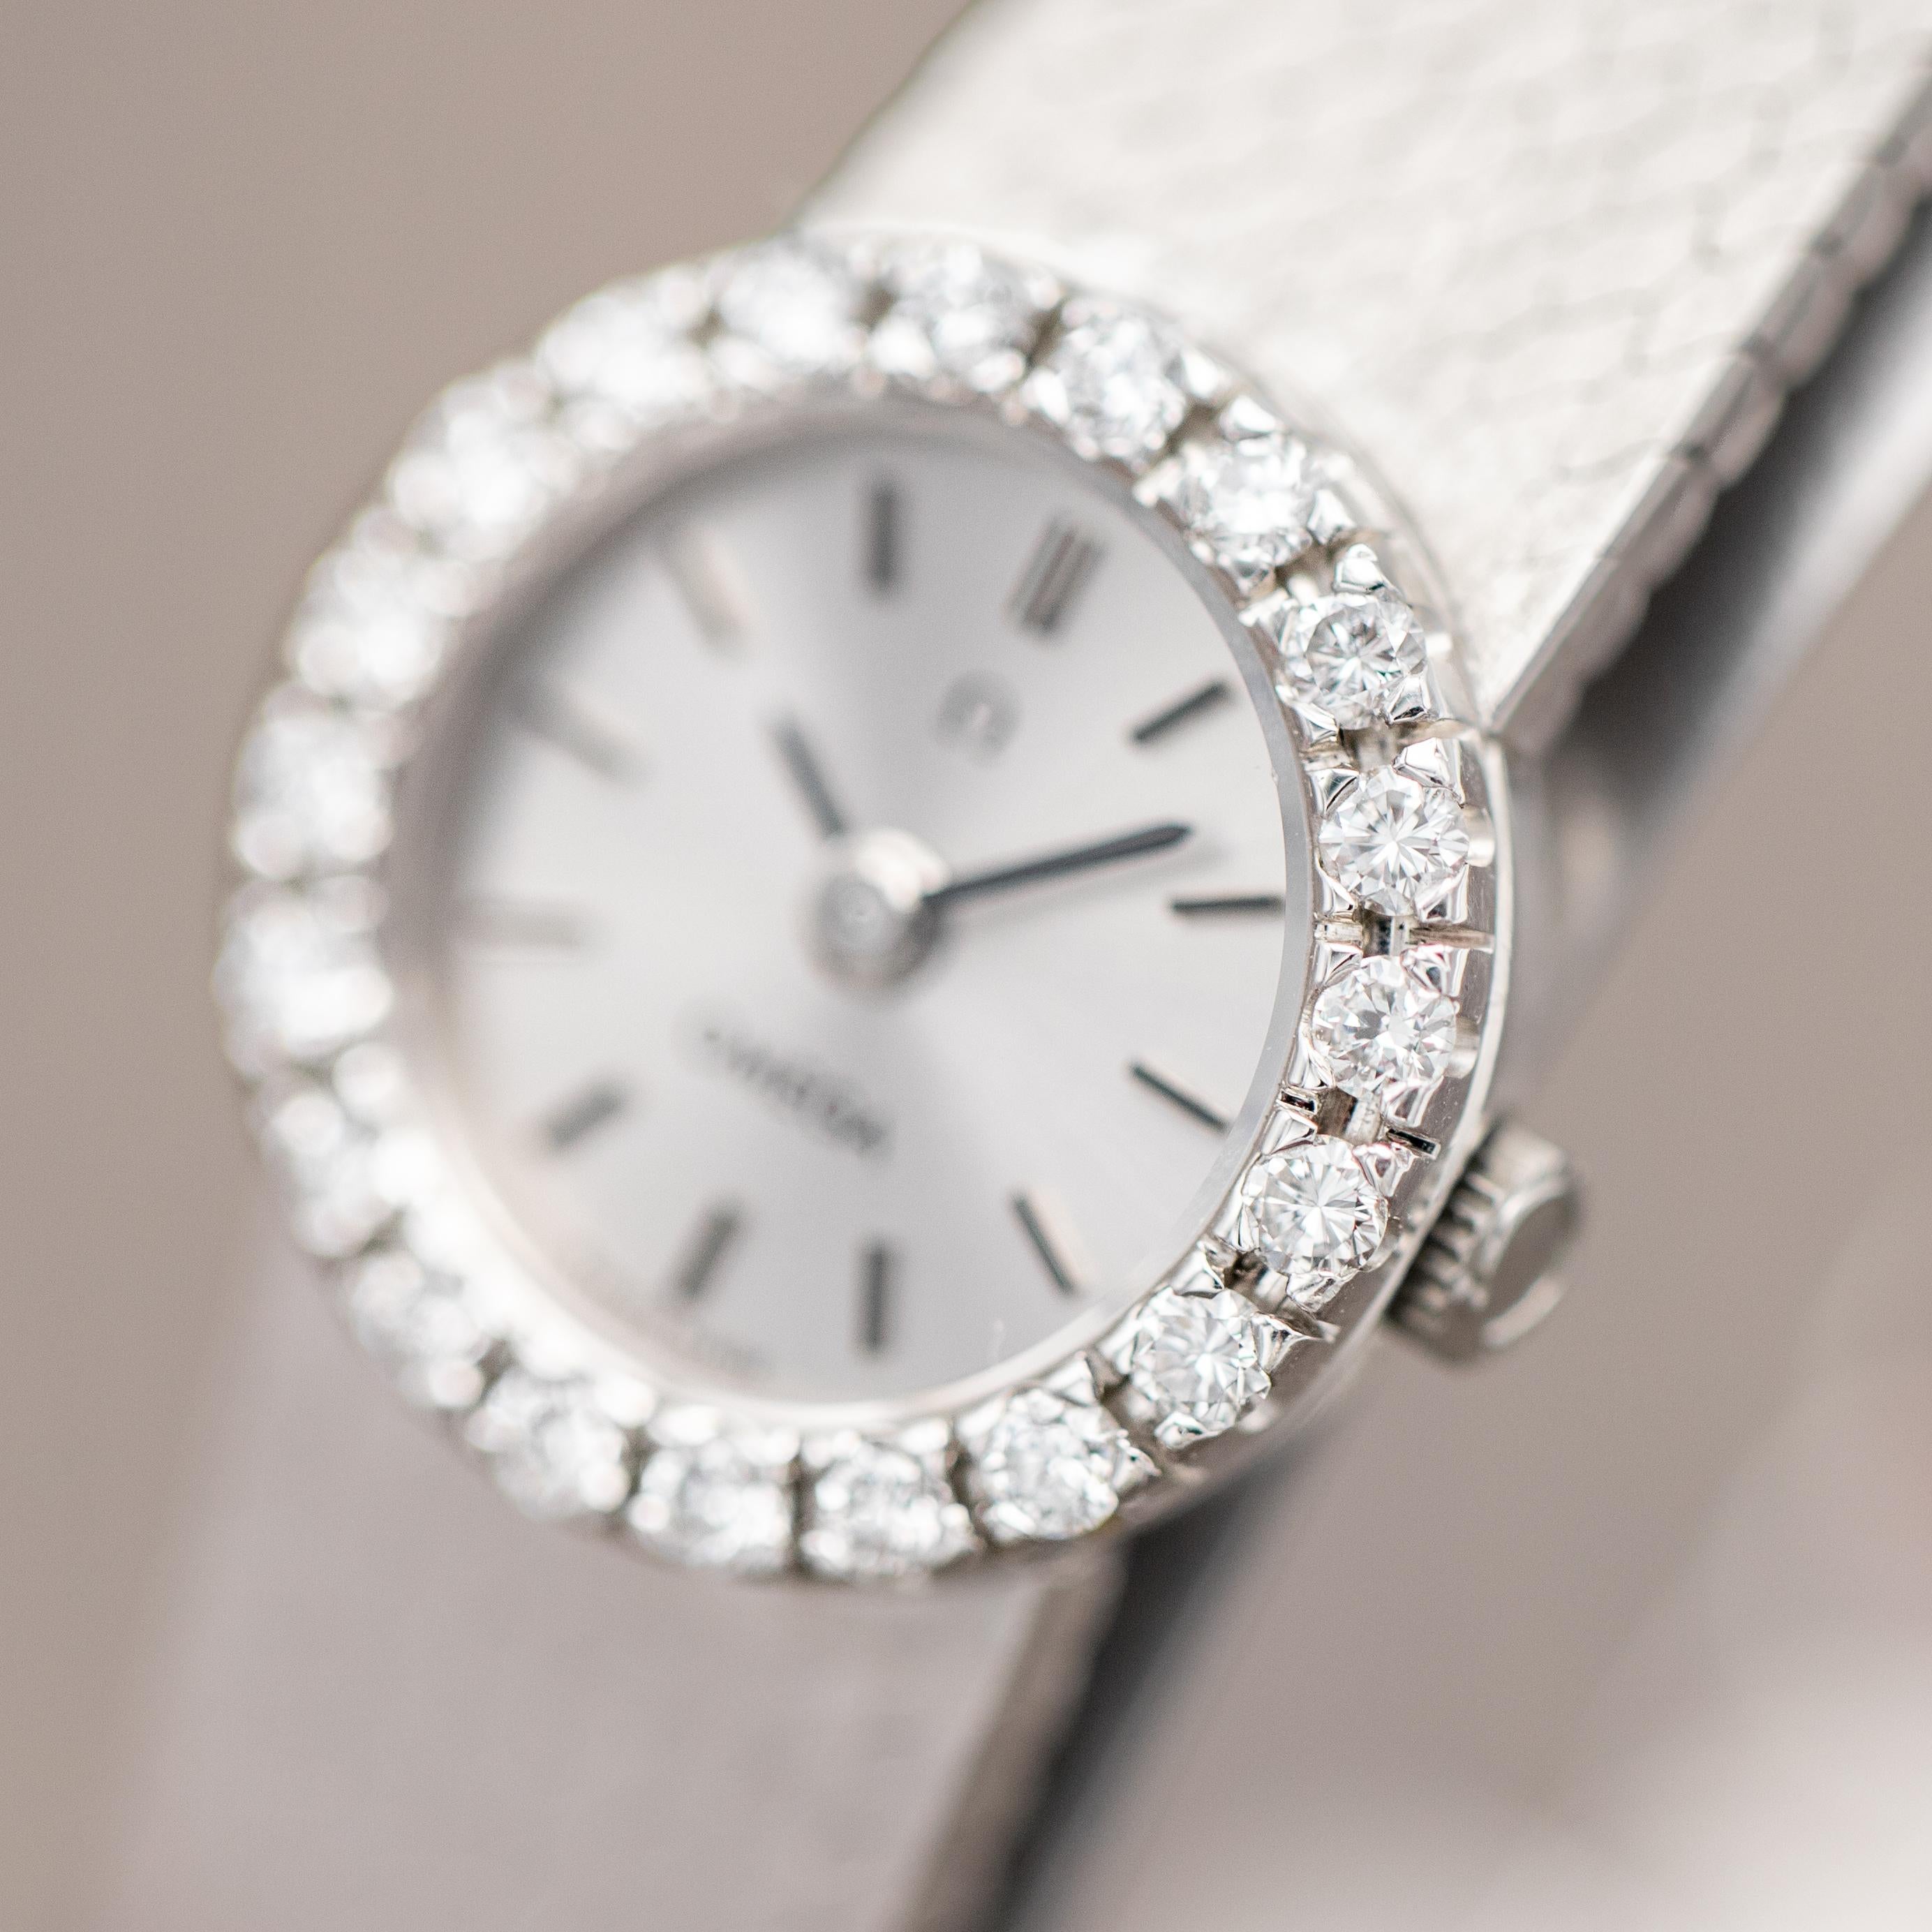 Women's Omega Cocktail - Vintage White Gold & Diamond Manual Wind Ladies' Watch For Sale